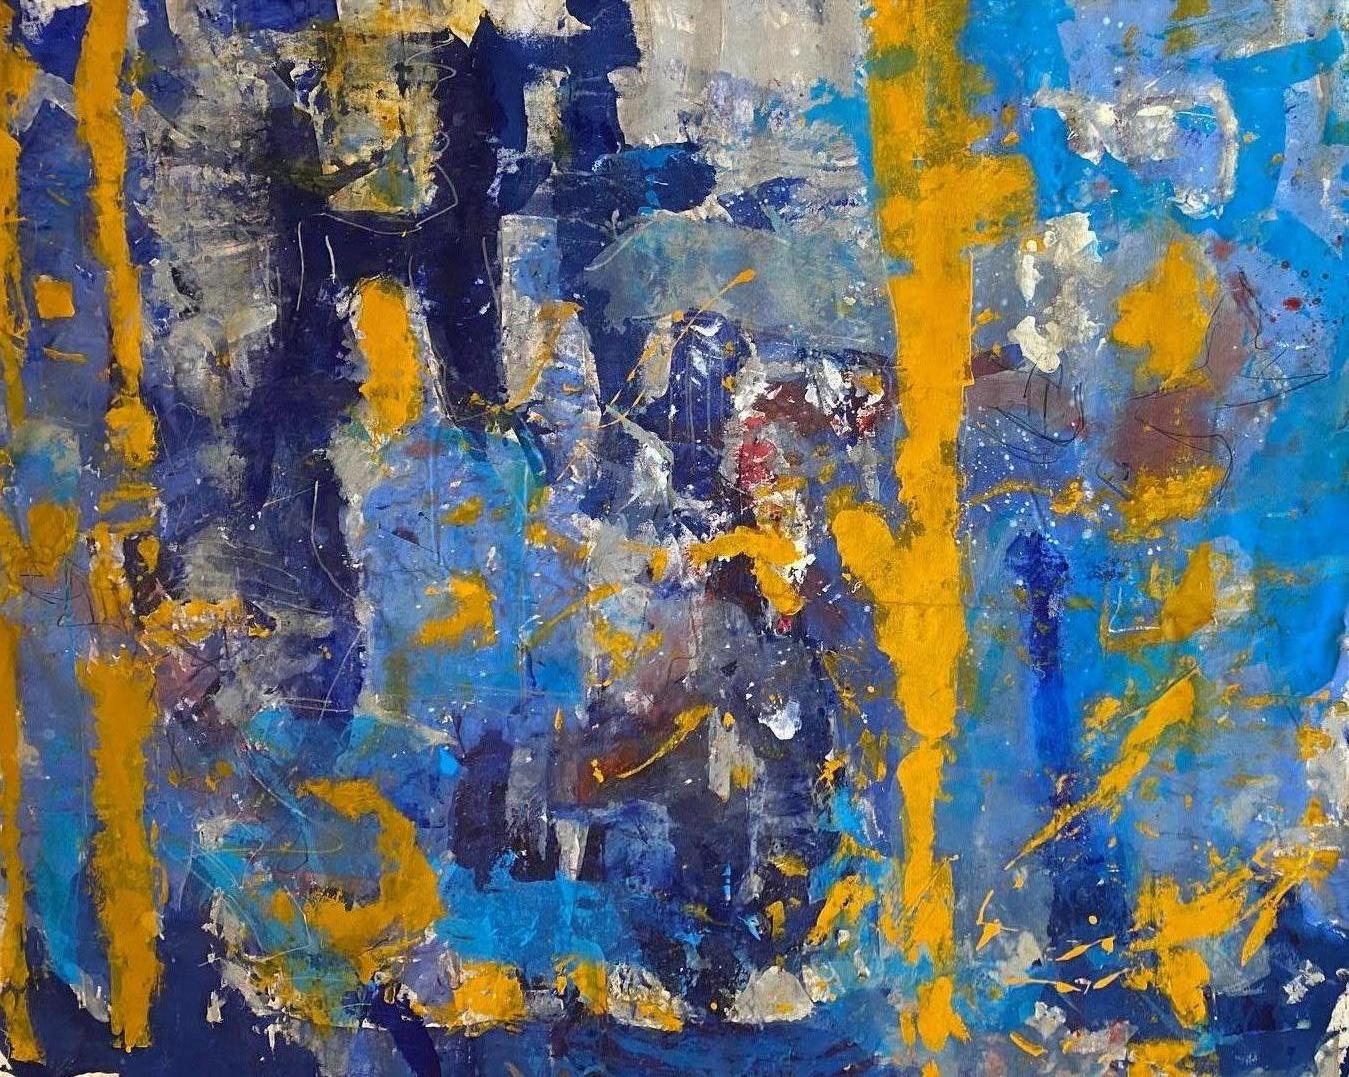 Nan Van Ryzin Abstract Painting - "Oceans Sunrise" Large Blue & Yellow Abstract Contemporary Mixed Media Art 